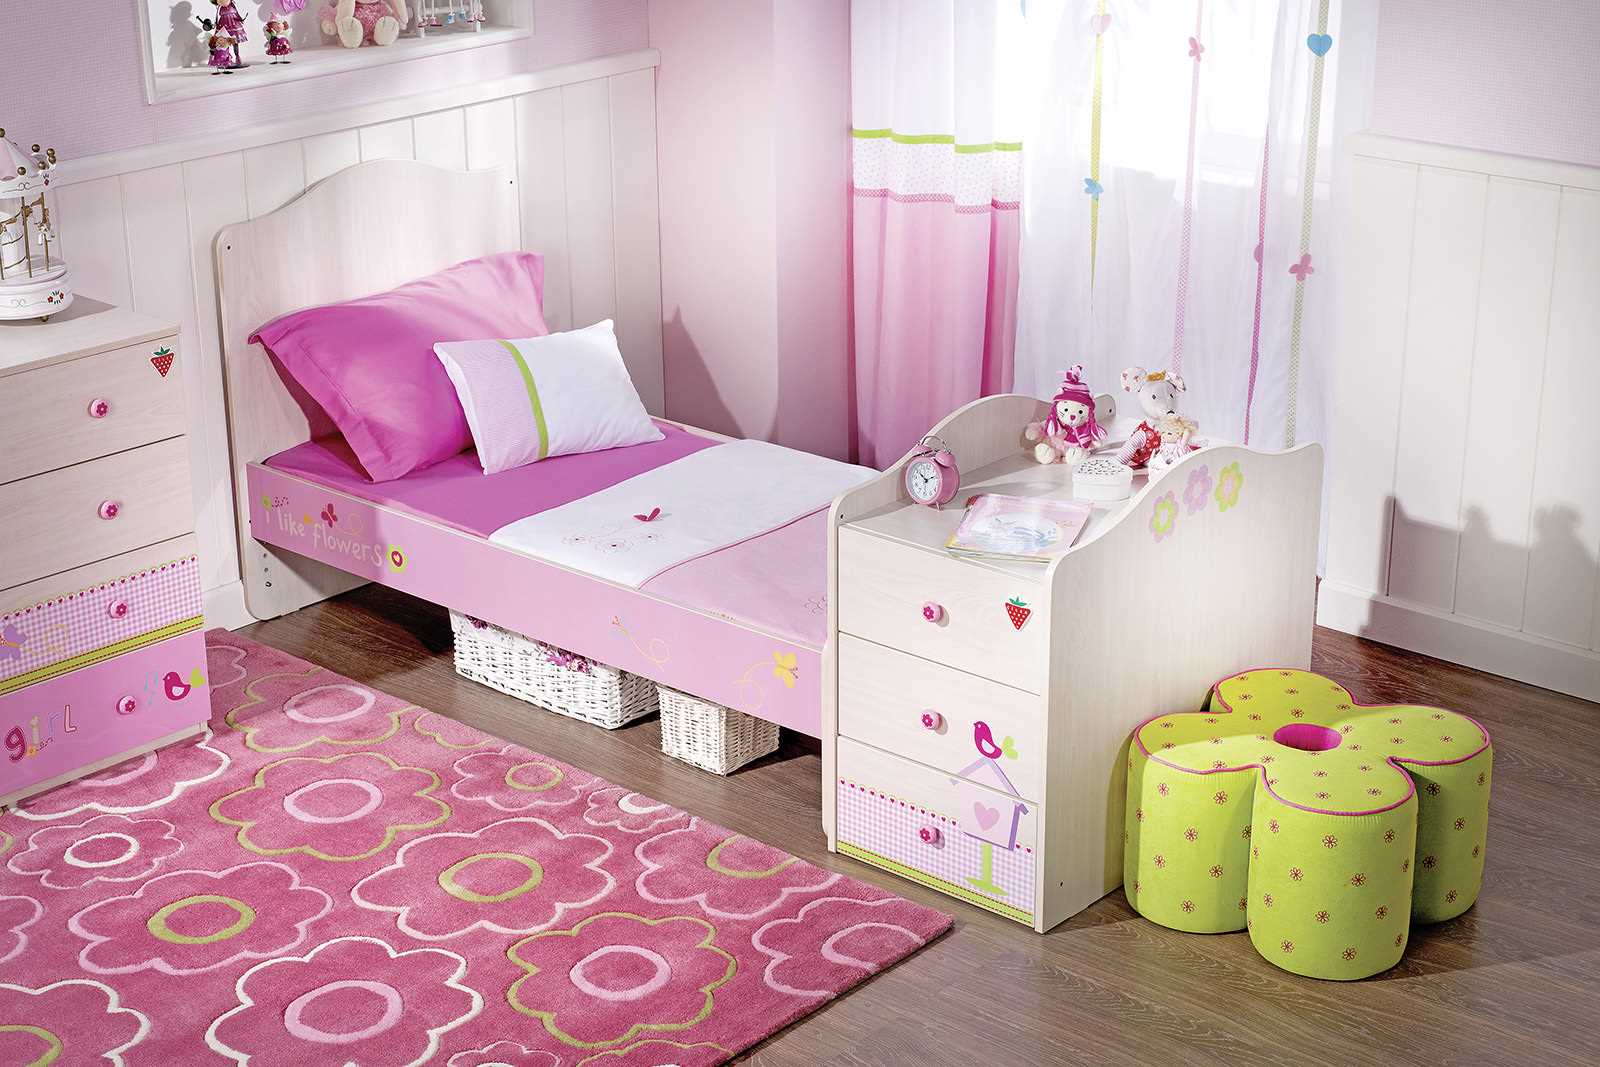 An example of using pink in an unusual apartment interior